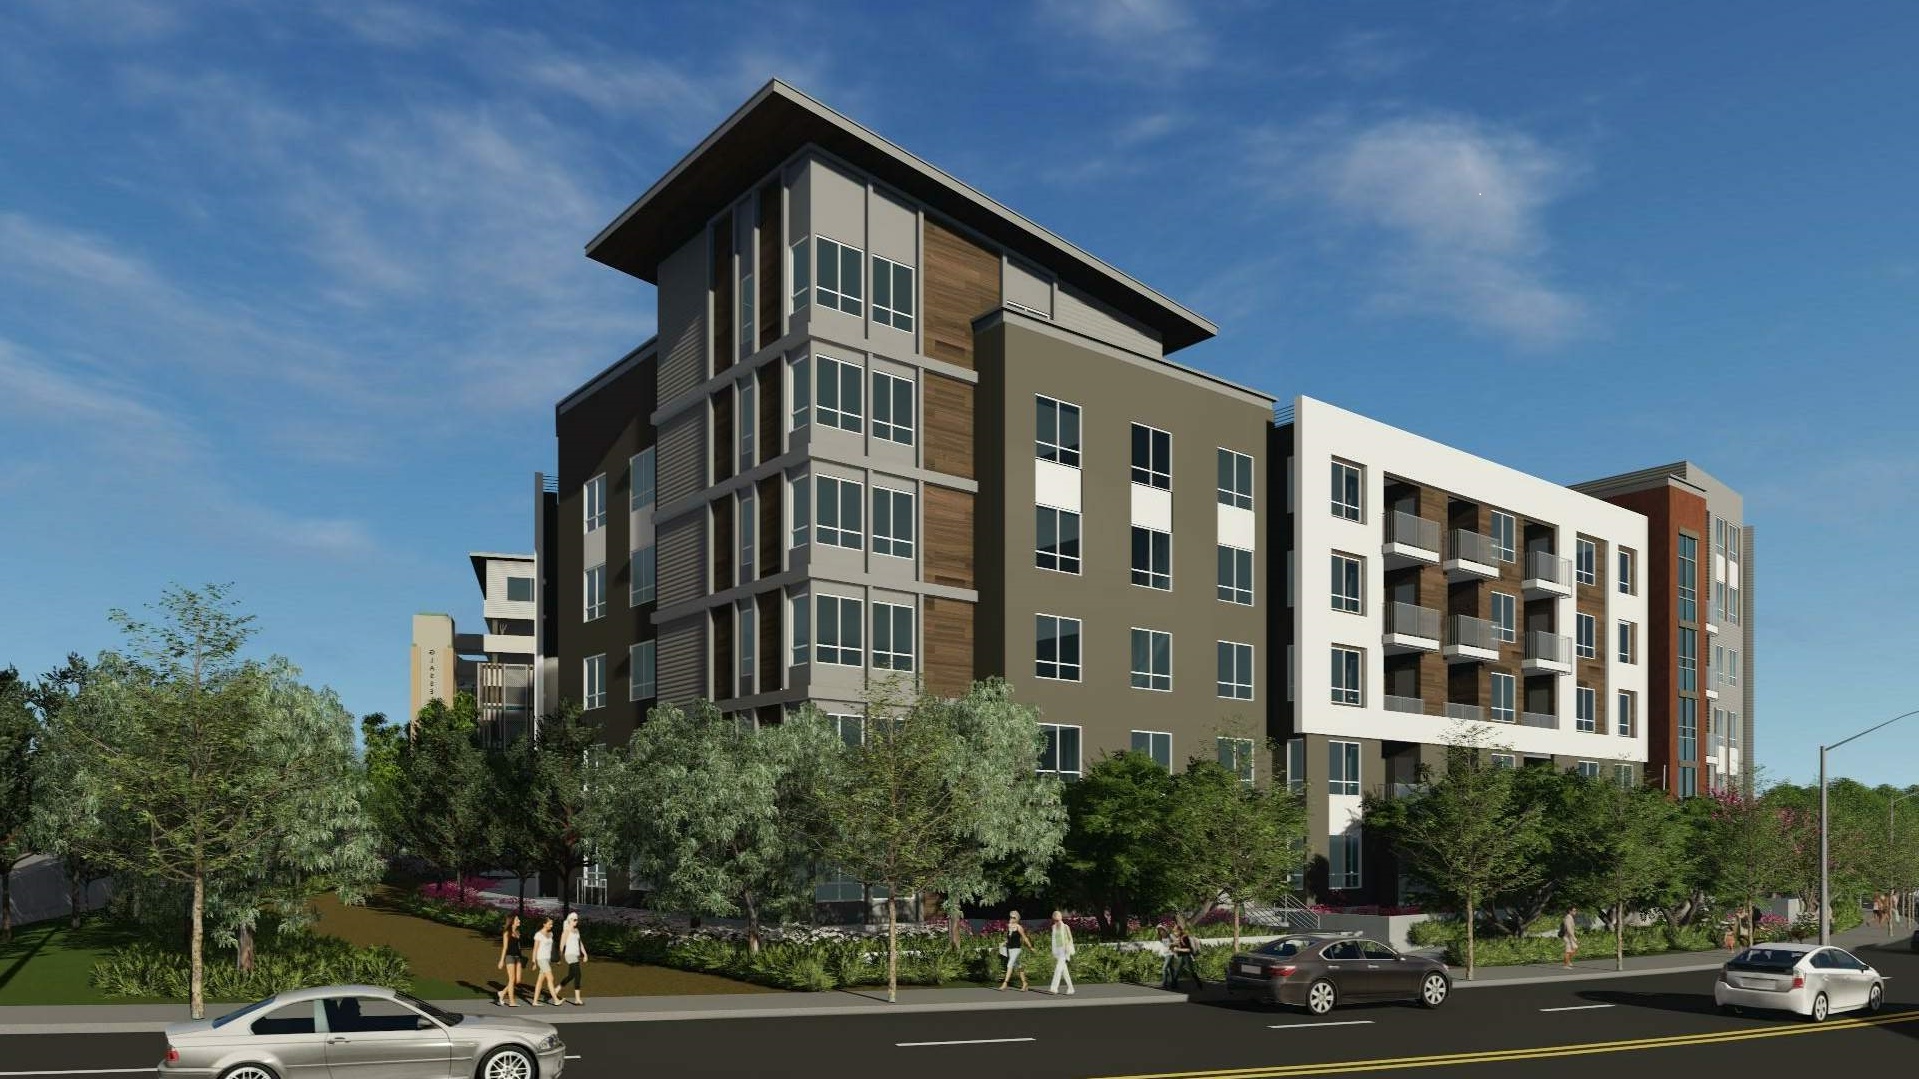 A digital rendering of the exterior of the Wylden Apartments in Los Angeles, California.